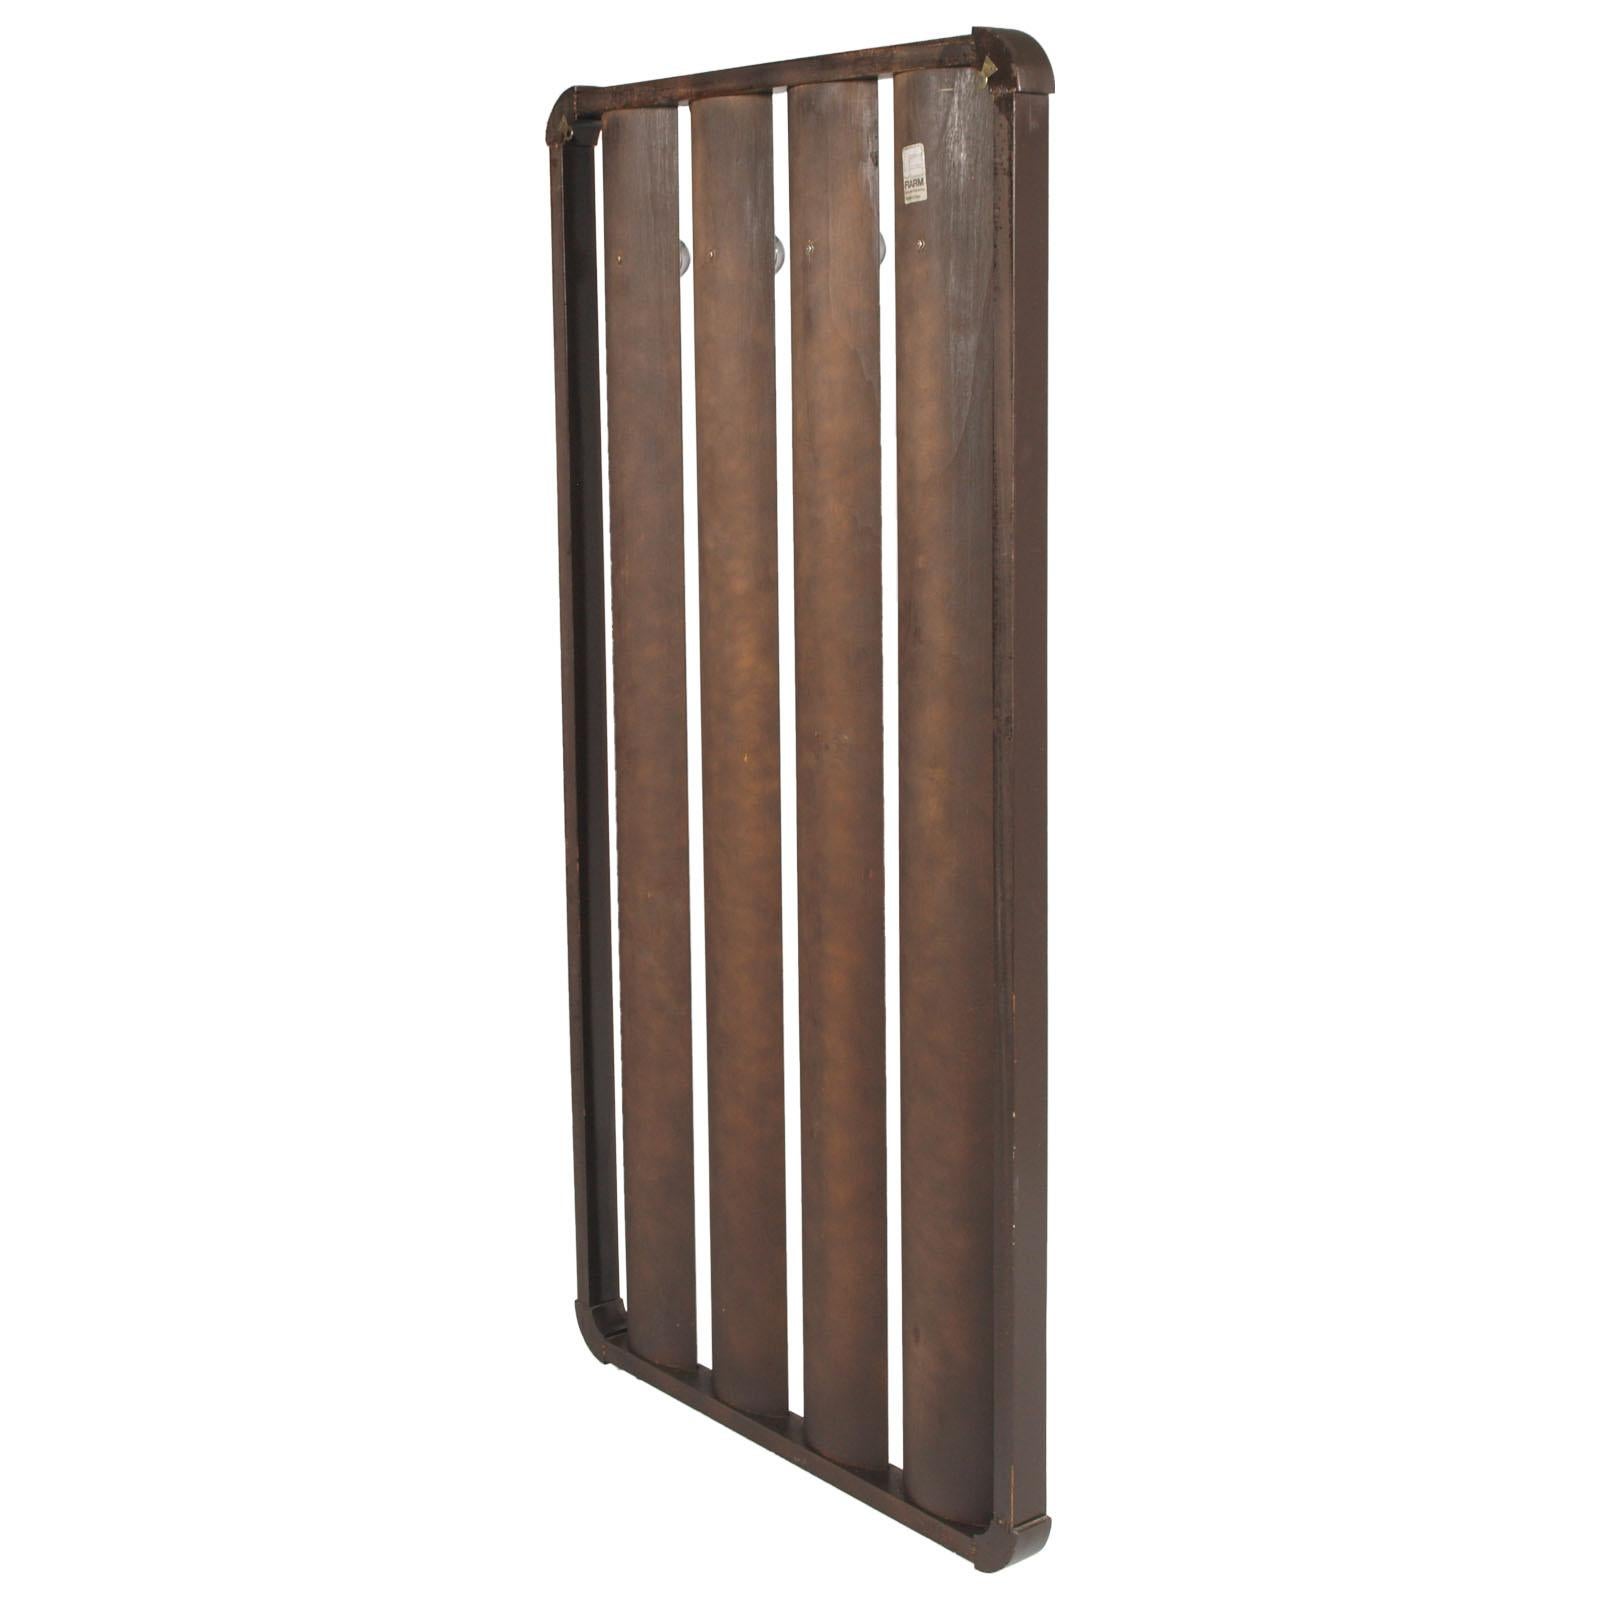 Galvanized 1960s Coat Rack by Carlo de Carli for FIARM in Curved Rosewood and Chrome Metal For Sale